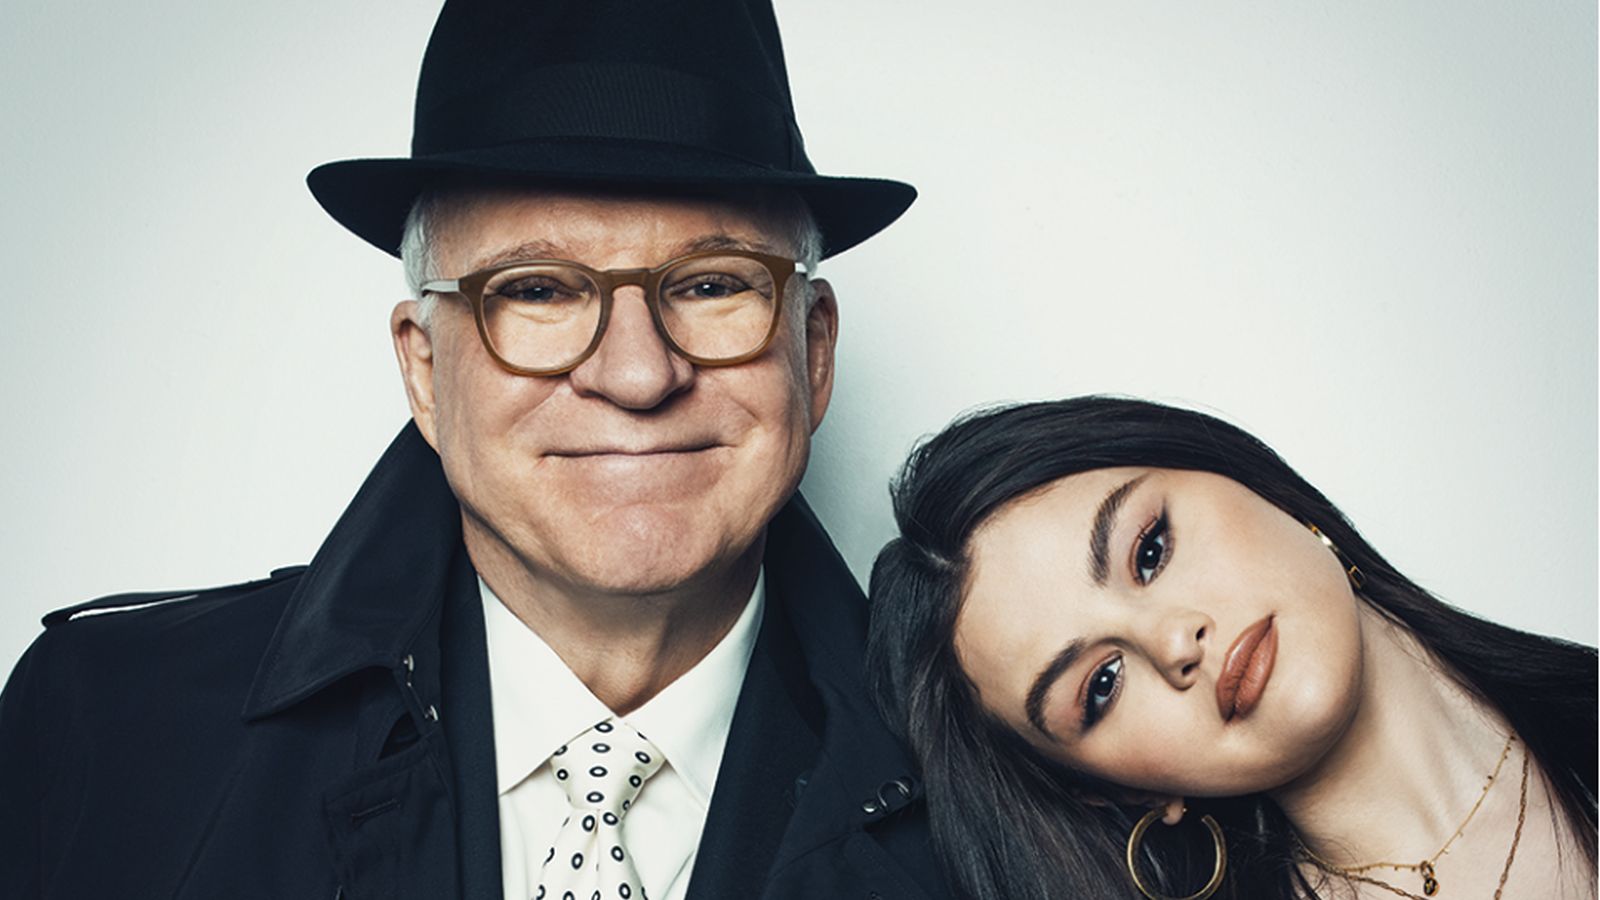 Selena Gomez in a wedding dress on the arm of Steve Martin in Only Murders in the Building 3 (PHOTOS)